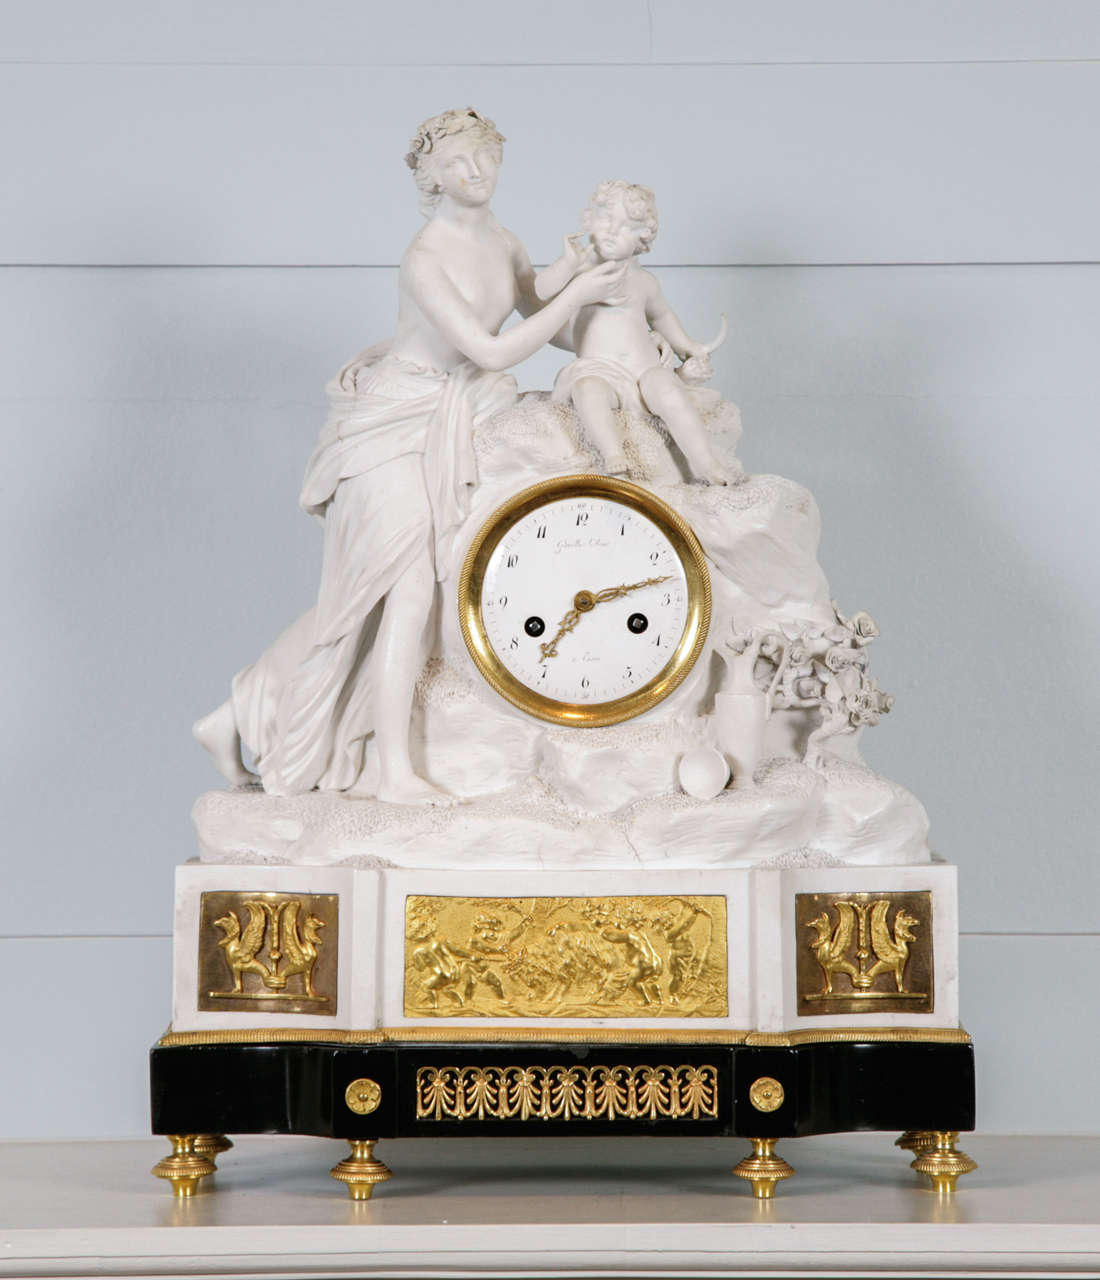 A substantial late 18th century French mantel clock by Gavelle of Paris.  The sculptured case of bisque porcelain depicting a classical female standing figure, with a winged cupid, sitting on rocky boulders of bisque porcelain, with a vase and